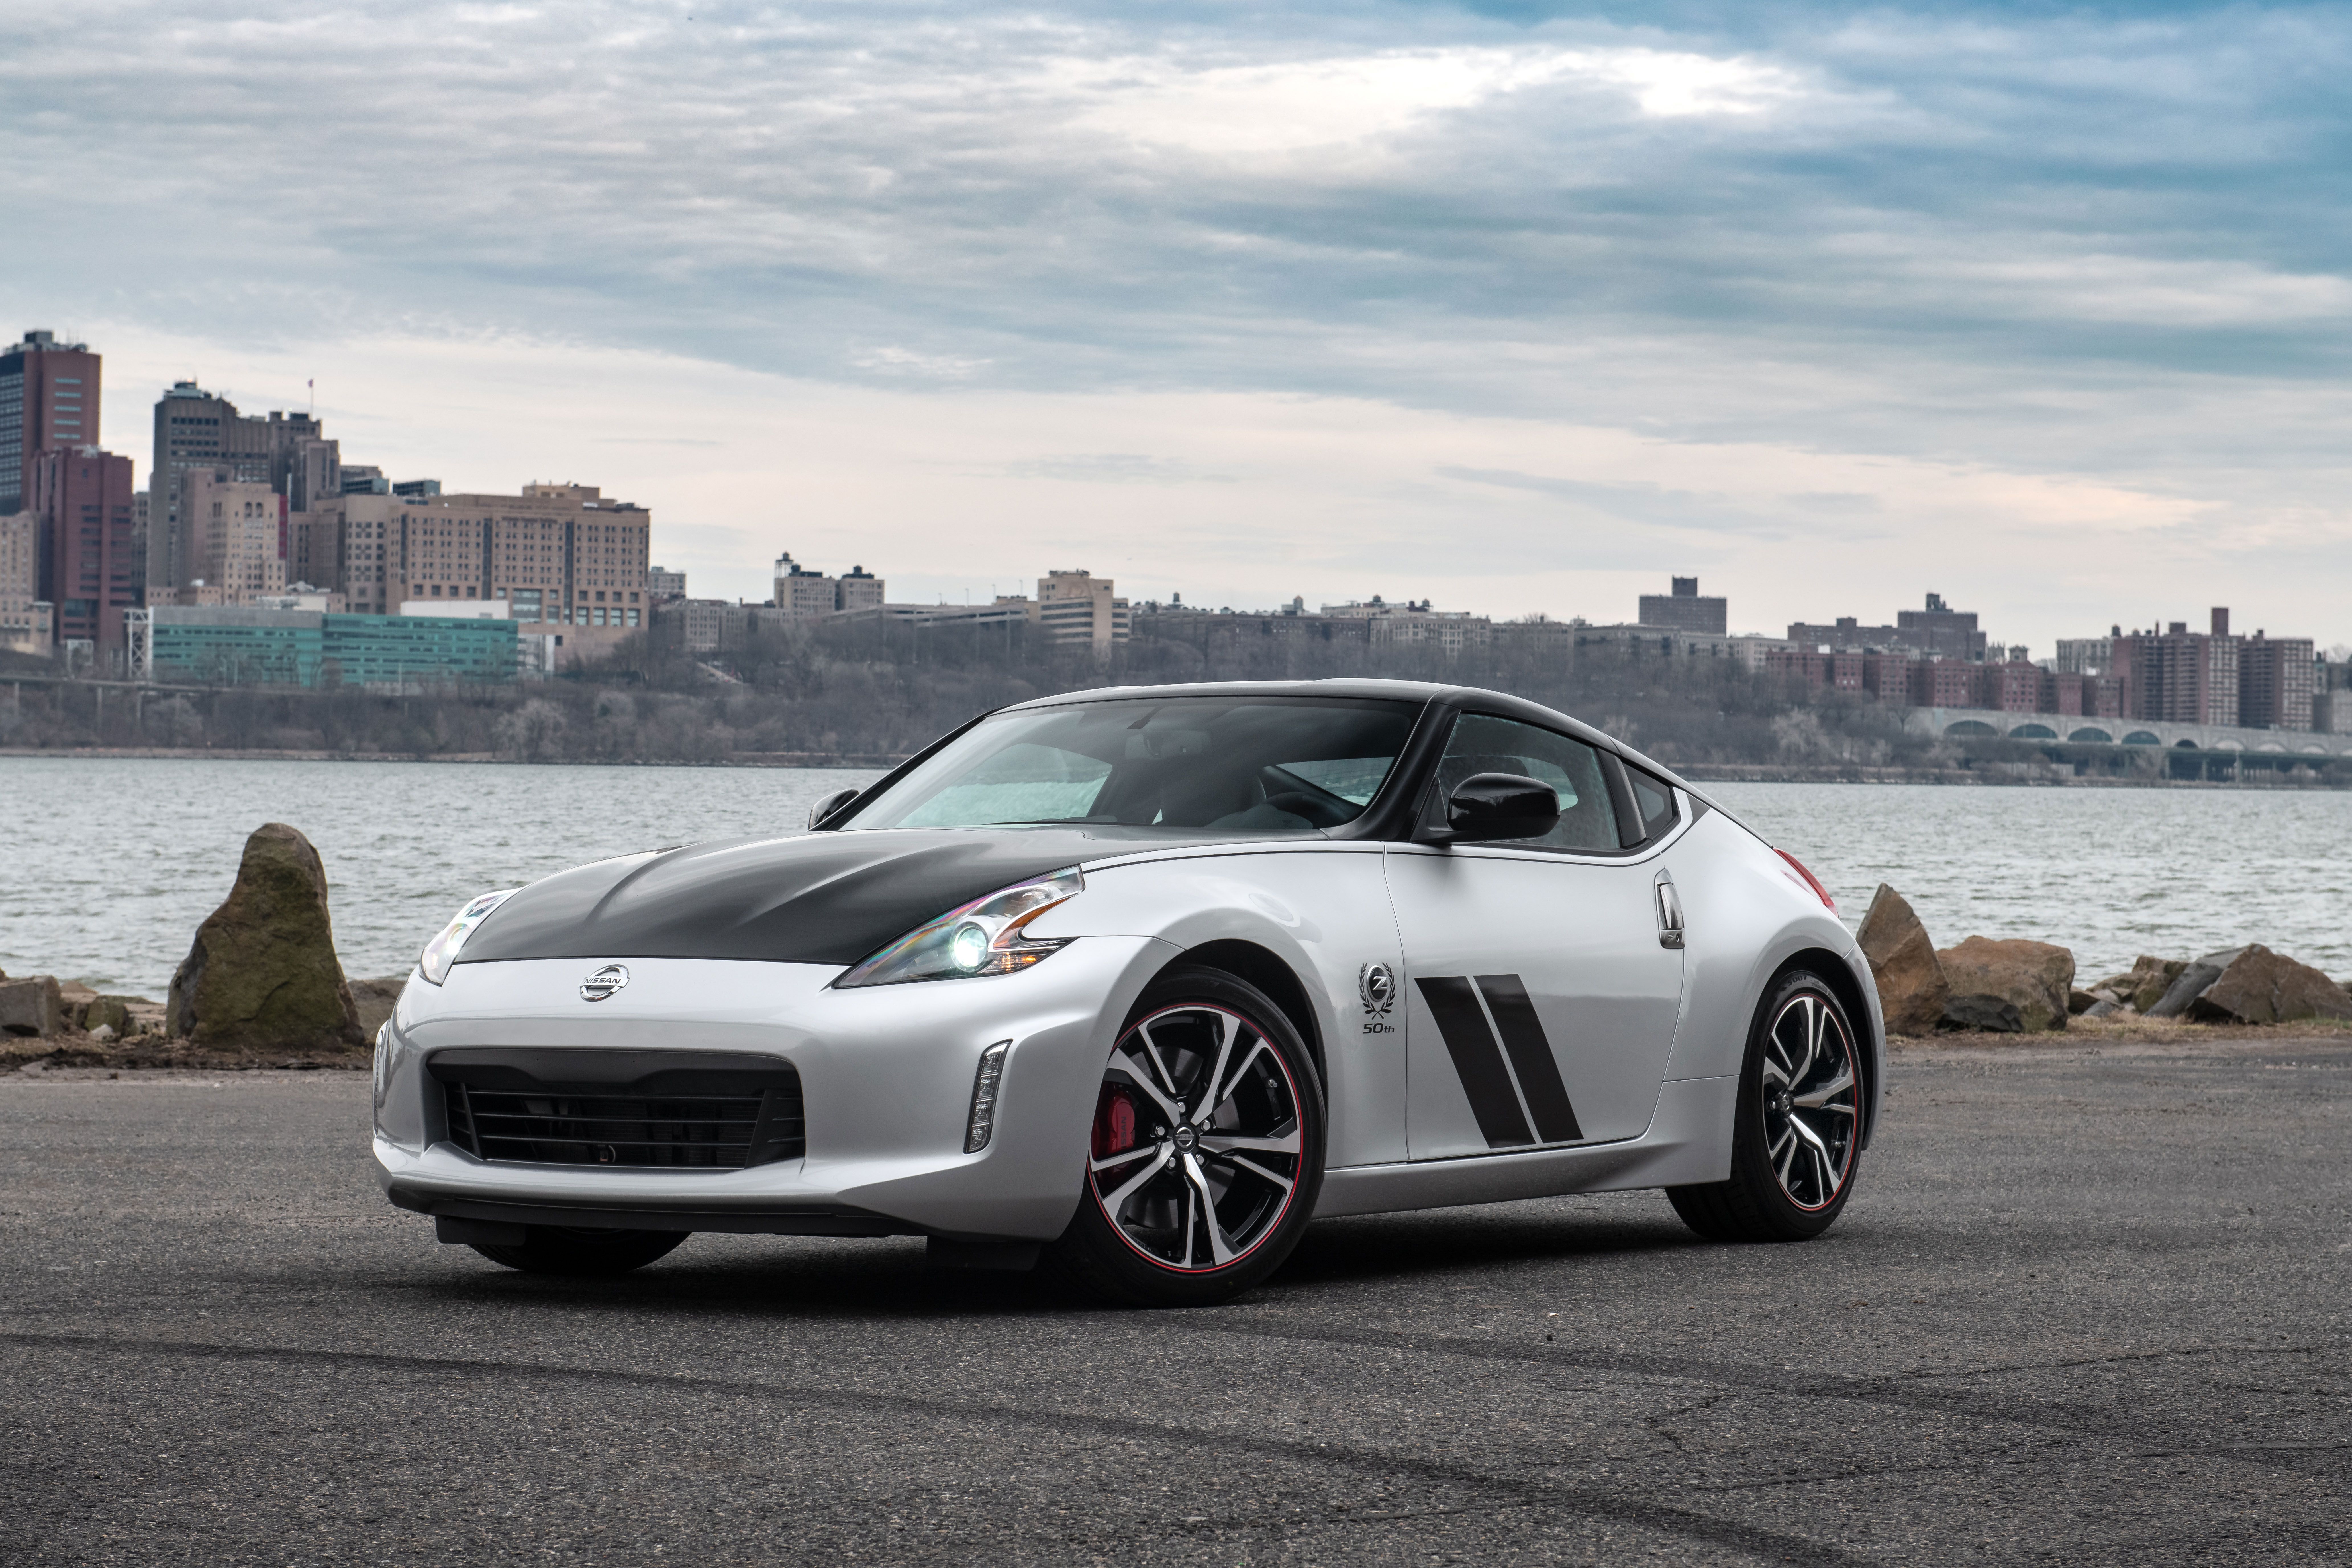 The exterior of the 370Z 50th Anniversary Edition mimics the livery of the original BRE race car and is available in two different paint schemes: white with red accents, or silver with black accents.